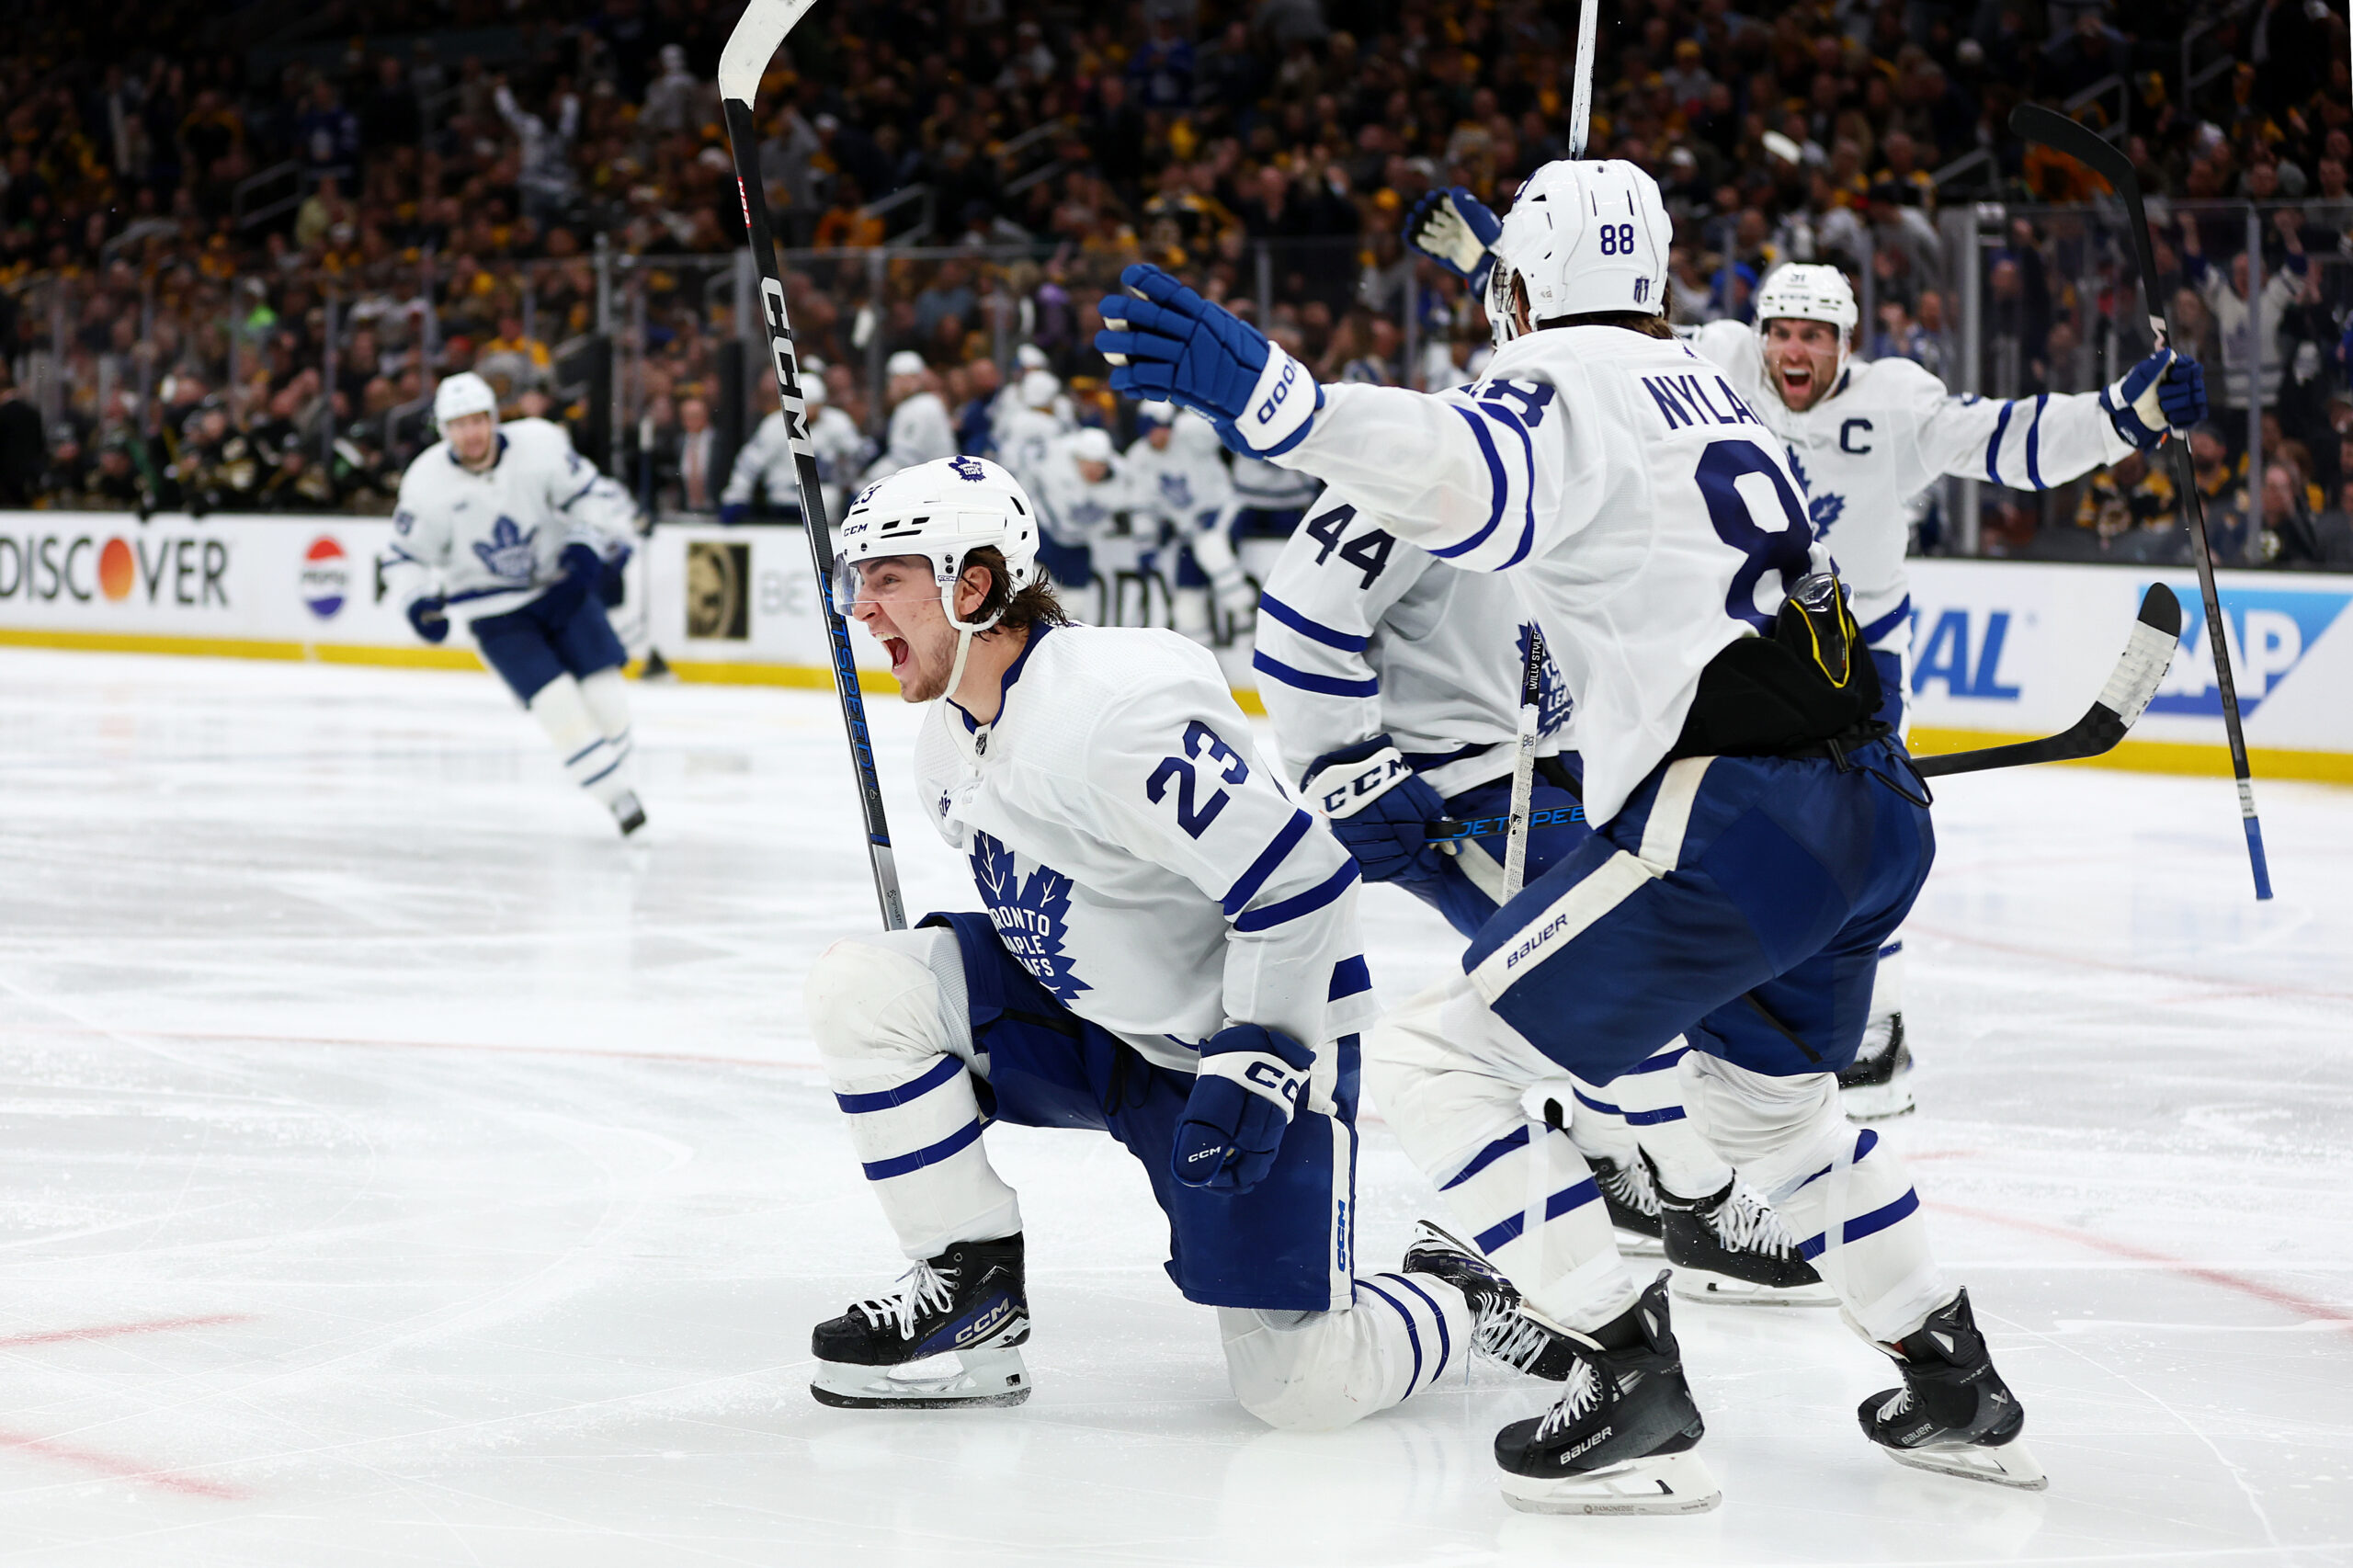 Maple Leafs vs. Bruins Game 6: Playoff Redemption Quest intensifies in Toronto clash